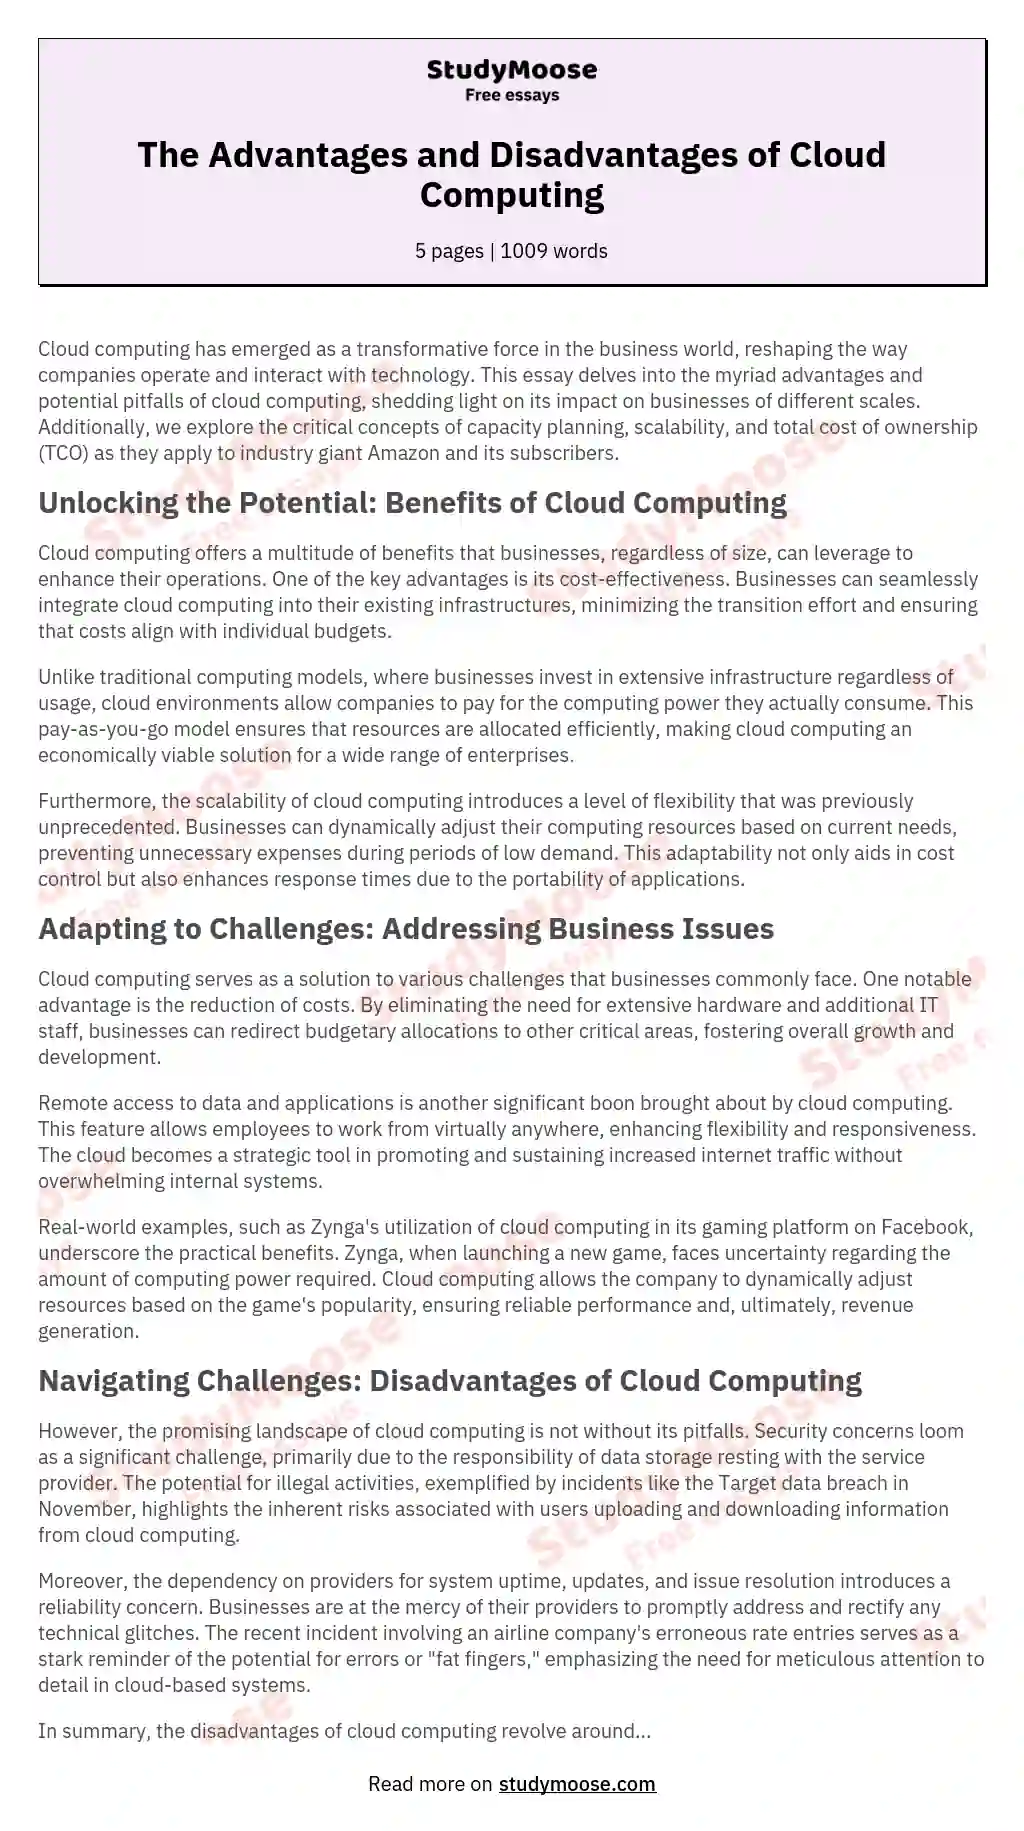 Cloud-computing services provide